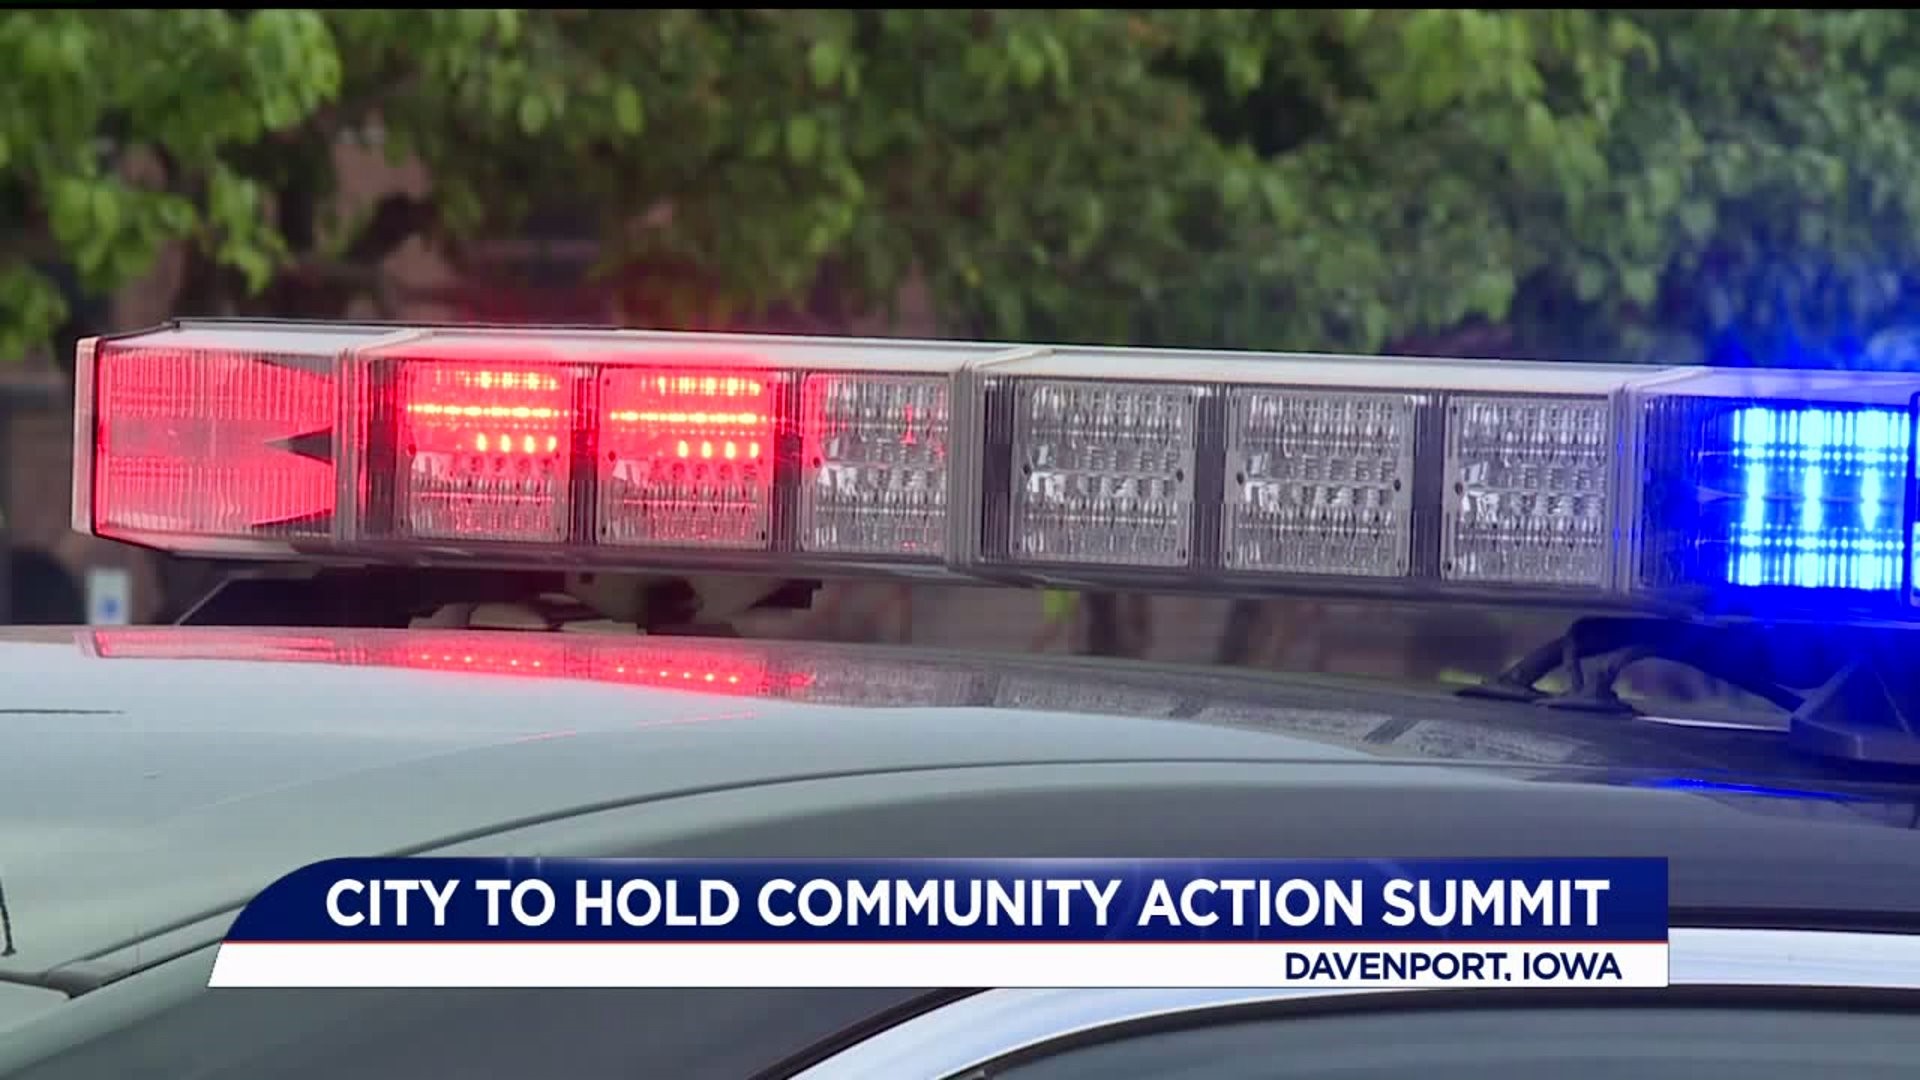 City to Hold Community Action Summit